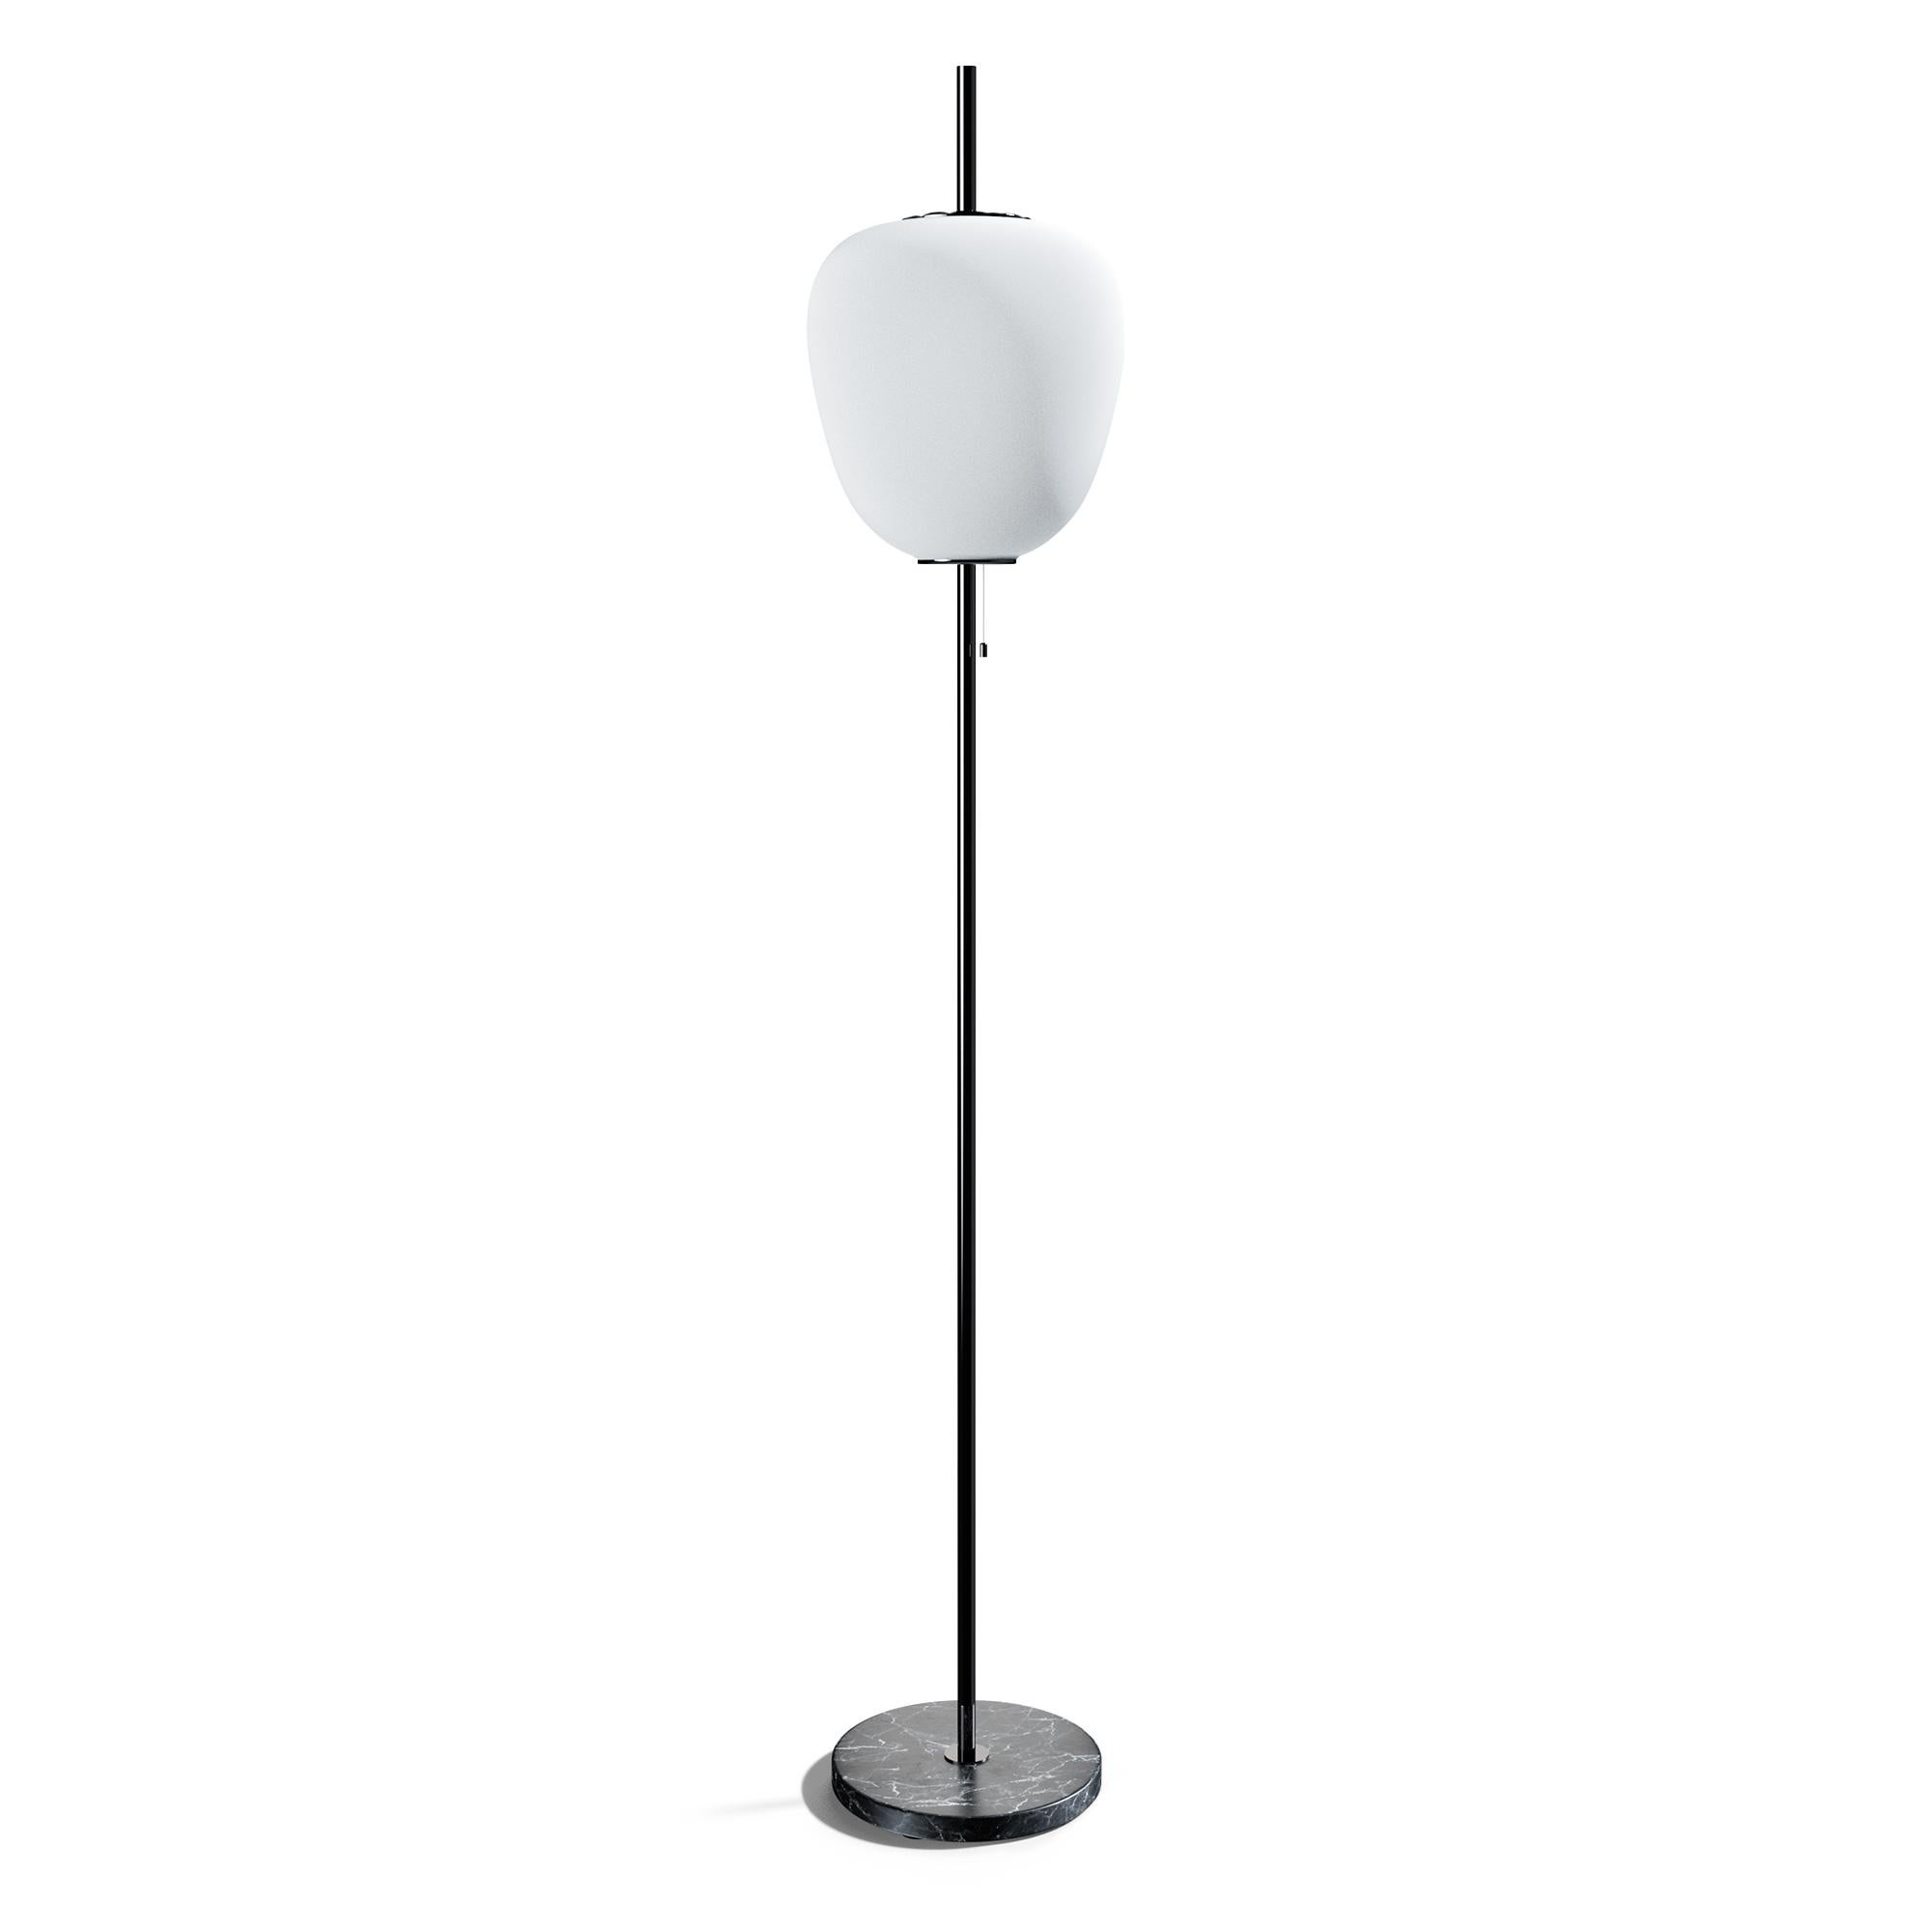 Large Joseph-André Motte J14 floor lamp in gunmetal and black marble for Disderot. 

Originally designed in 1957, this sculptural floor lamp is a newly produced numbered edition with authentication certificate made in France by Disderot with many of